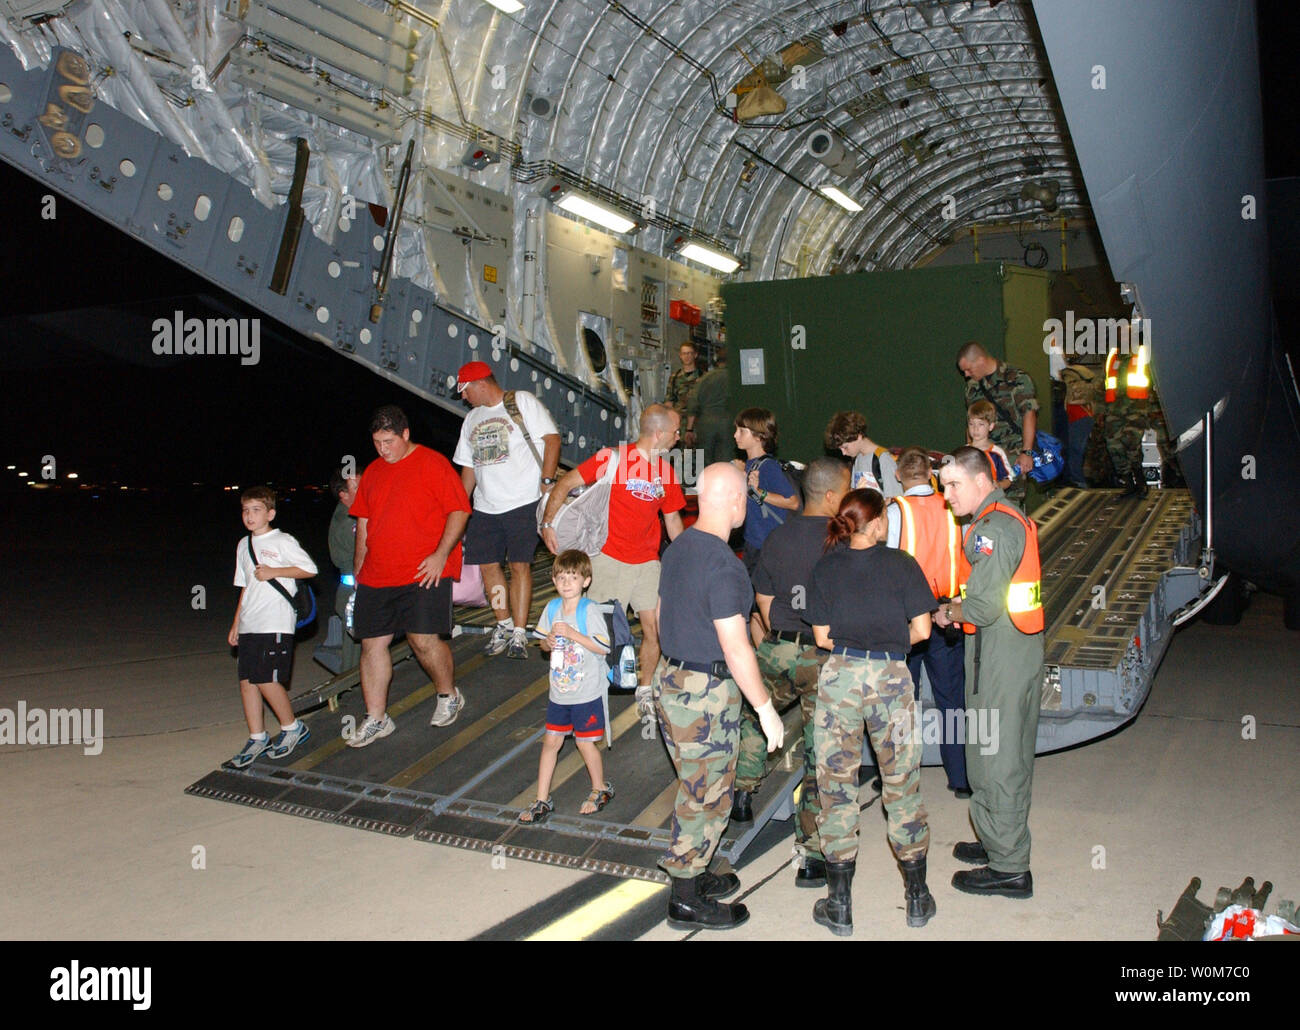 https://c8.alamy.com/comp/W0M7C0/individuals-are-evacuated-from-keesler-air-force-base-mississippi-due-to-flooding-from-hurricane-katrina-on-august-30-2005-they-were-transported-by-the-mississippi-air-national-guard-on-a-c17-to-kelly-city-base-tx-upi-photoheather-norris-W0M7C0.jpg